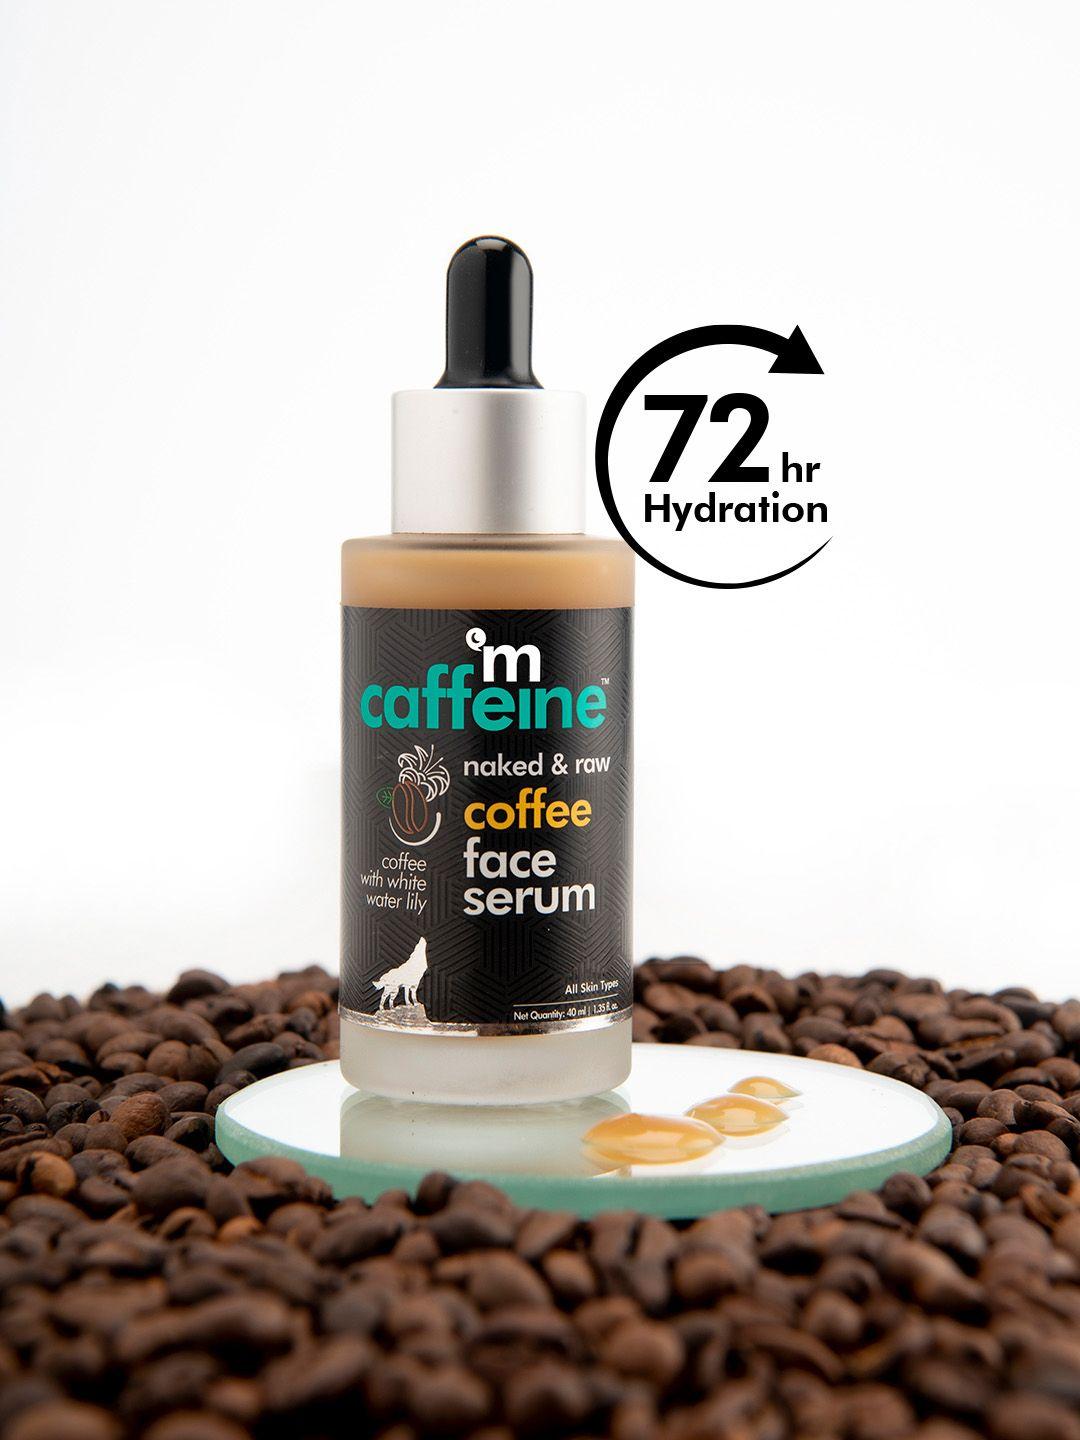 mcaffeine sustainable coffee hydrating face serum for glowing skin with vitamin e for sun protection